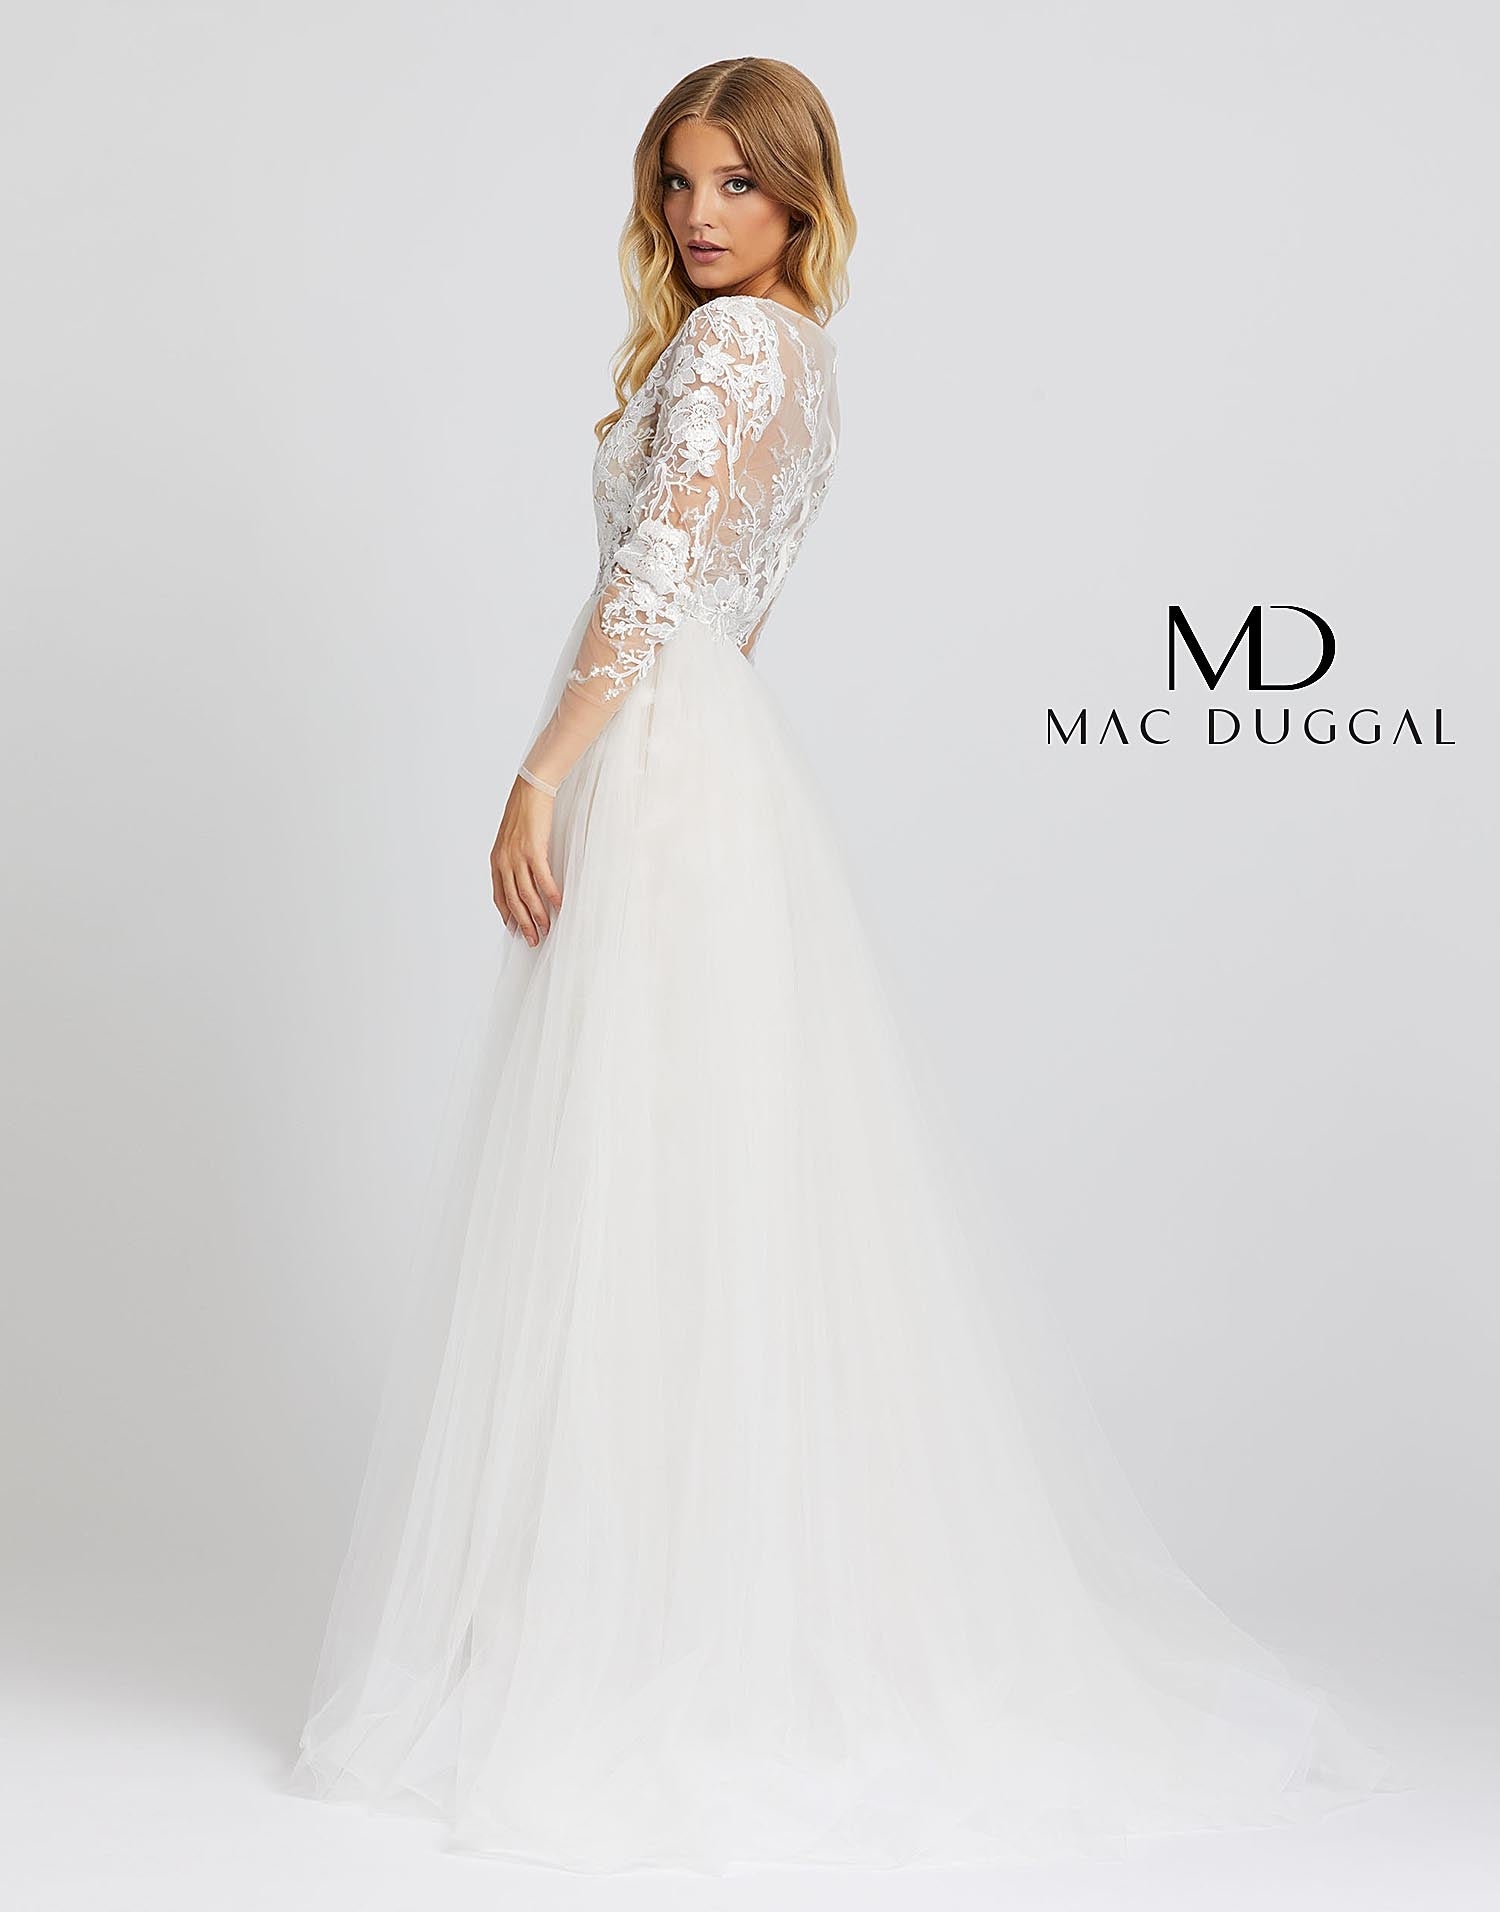 Mac Duggal 26322M - 26322 Love this dress so much you’ll want to re-wear it for your wedding! Style 26322M is an ivory nude ball gown with sheer long sleeves, a v-neckline, and overskirt. This incredible gown has embroidery detailing from head to toe. 